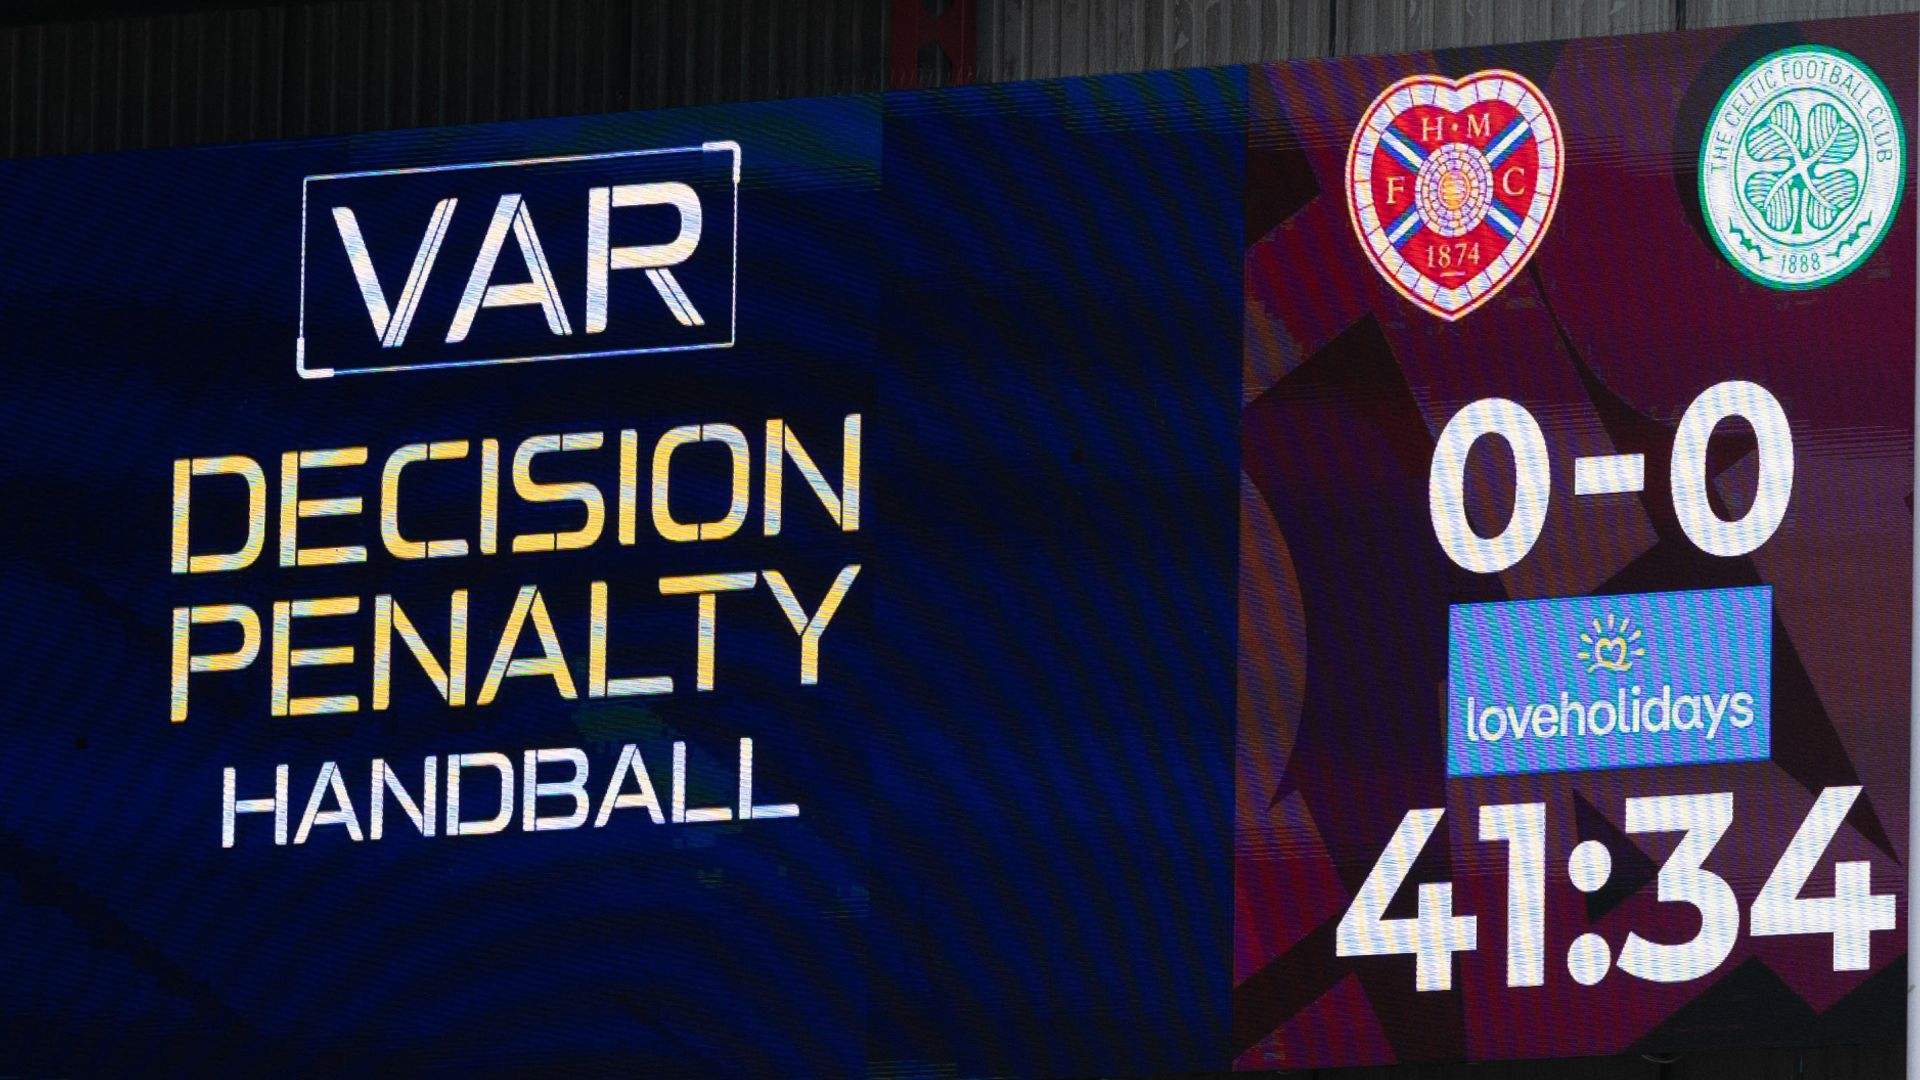 Scottish Premiership VAR errors revealed - which club's were impacted?